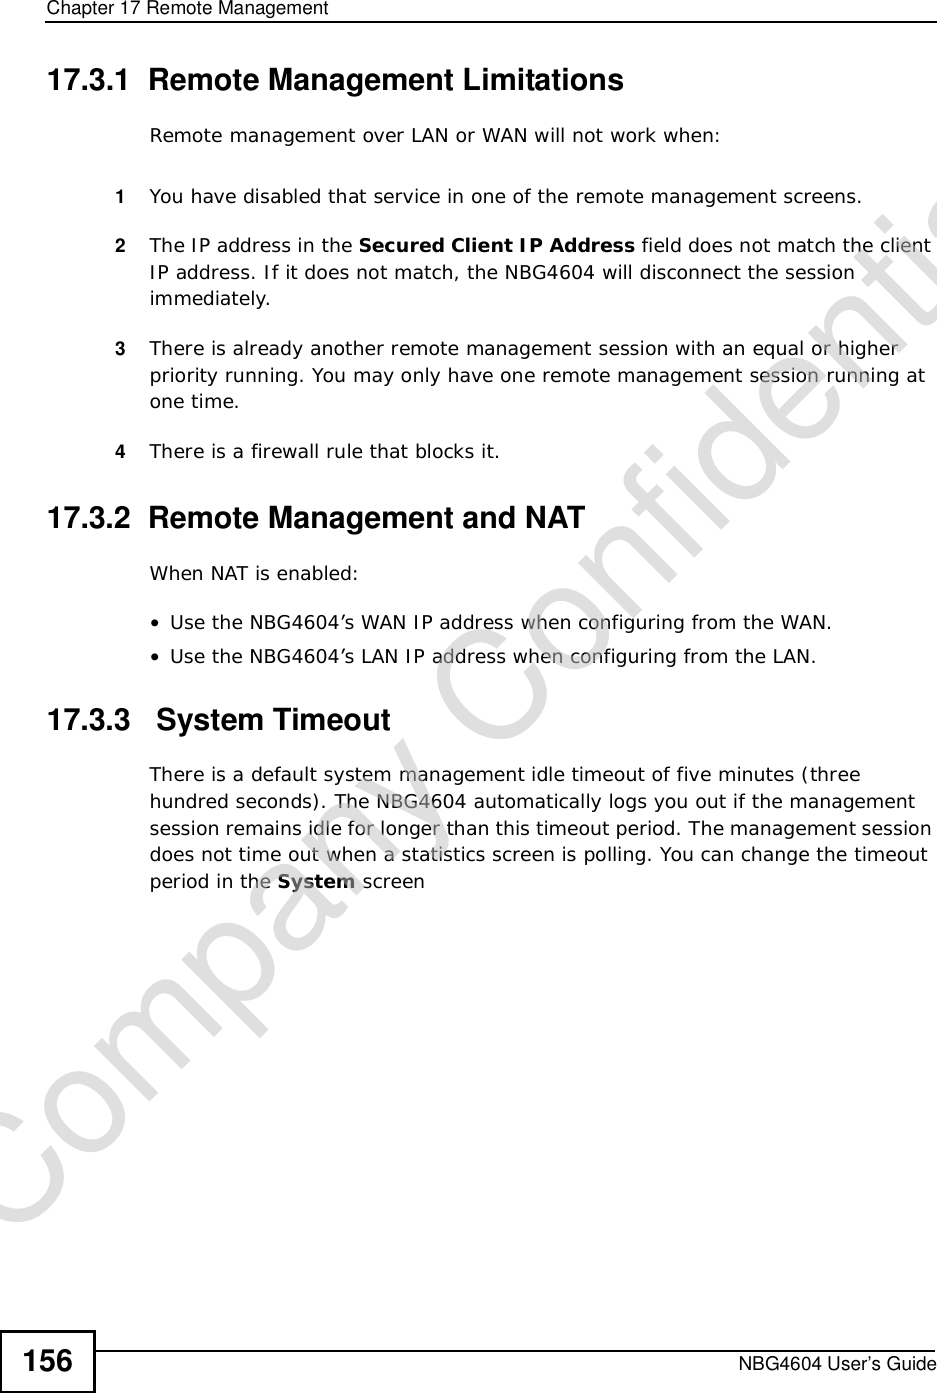 Chapter 17Remote ManagementNBG4604 User’s Guide15617.3.1  Remote Management LimitationsRemote management over LAN or WAN will not work when:1You have disabled that service in one of the remote management screens.2The IP address in the Secured Client IP Address field does not match the client IP address. If it does not match, the NBG4604 will disconnect the session immediately.3There is already another remote management session with an equal or higher priority running. You may only have one remote management session running at one time.4There is a firewall rule that blocks it.17.3.2  Remote Management and NATWhen NAT is enabled:•Use the NBG4604’s WAN IP address when configuring from the WAN. •Use the NBG4604’s LAN IP address when configuring from the LAN.17.3.3   System TimeoutThere is a default system management idle timeout of five minutes (three hundred seconds). The NBG4604 automatically logs you out if the management session remains idle for longer than this timeout period. The management session does not time out when a statistics screen is polling. You can change the timeout period in the System screenCompany Confidential